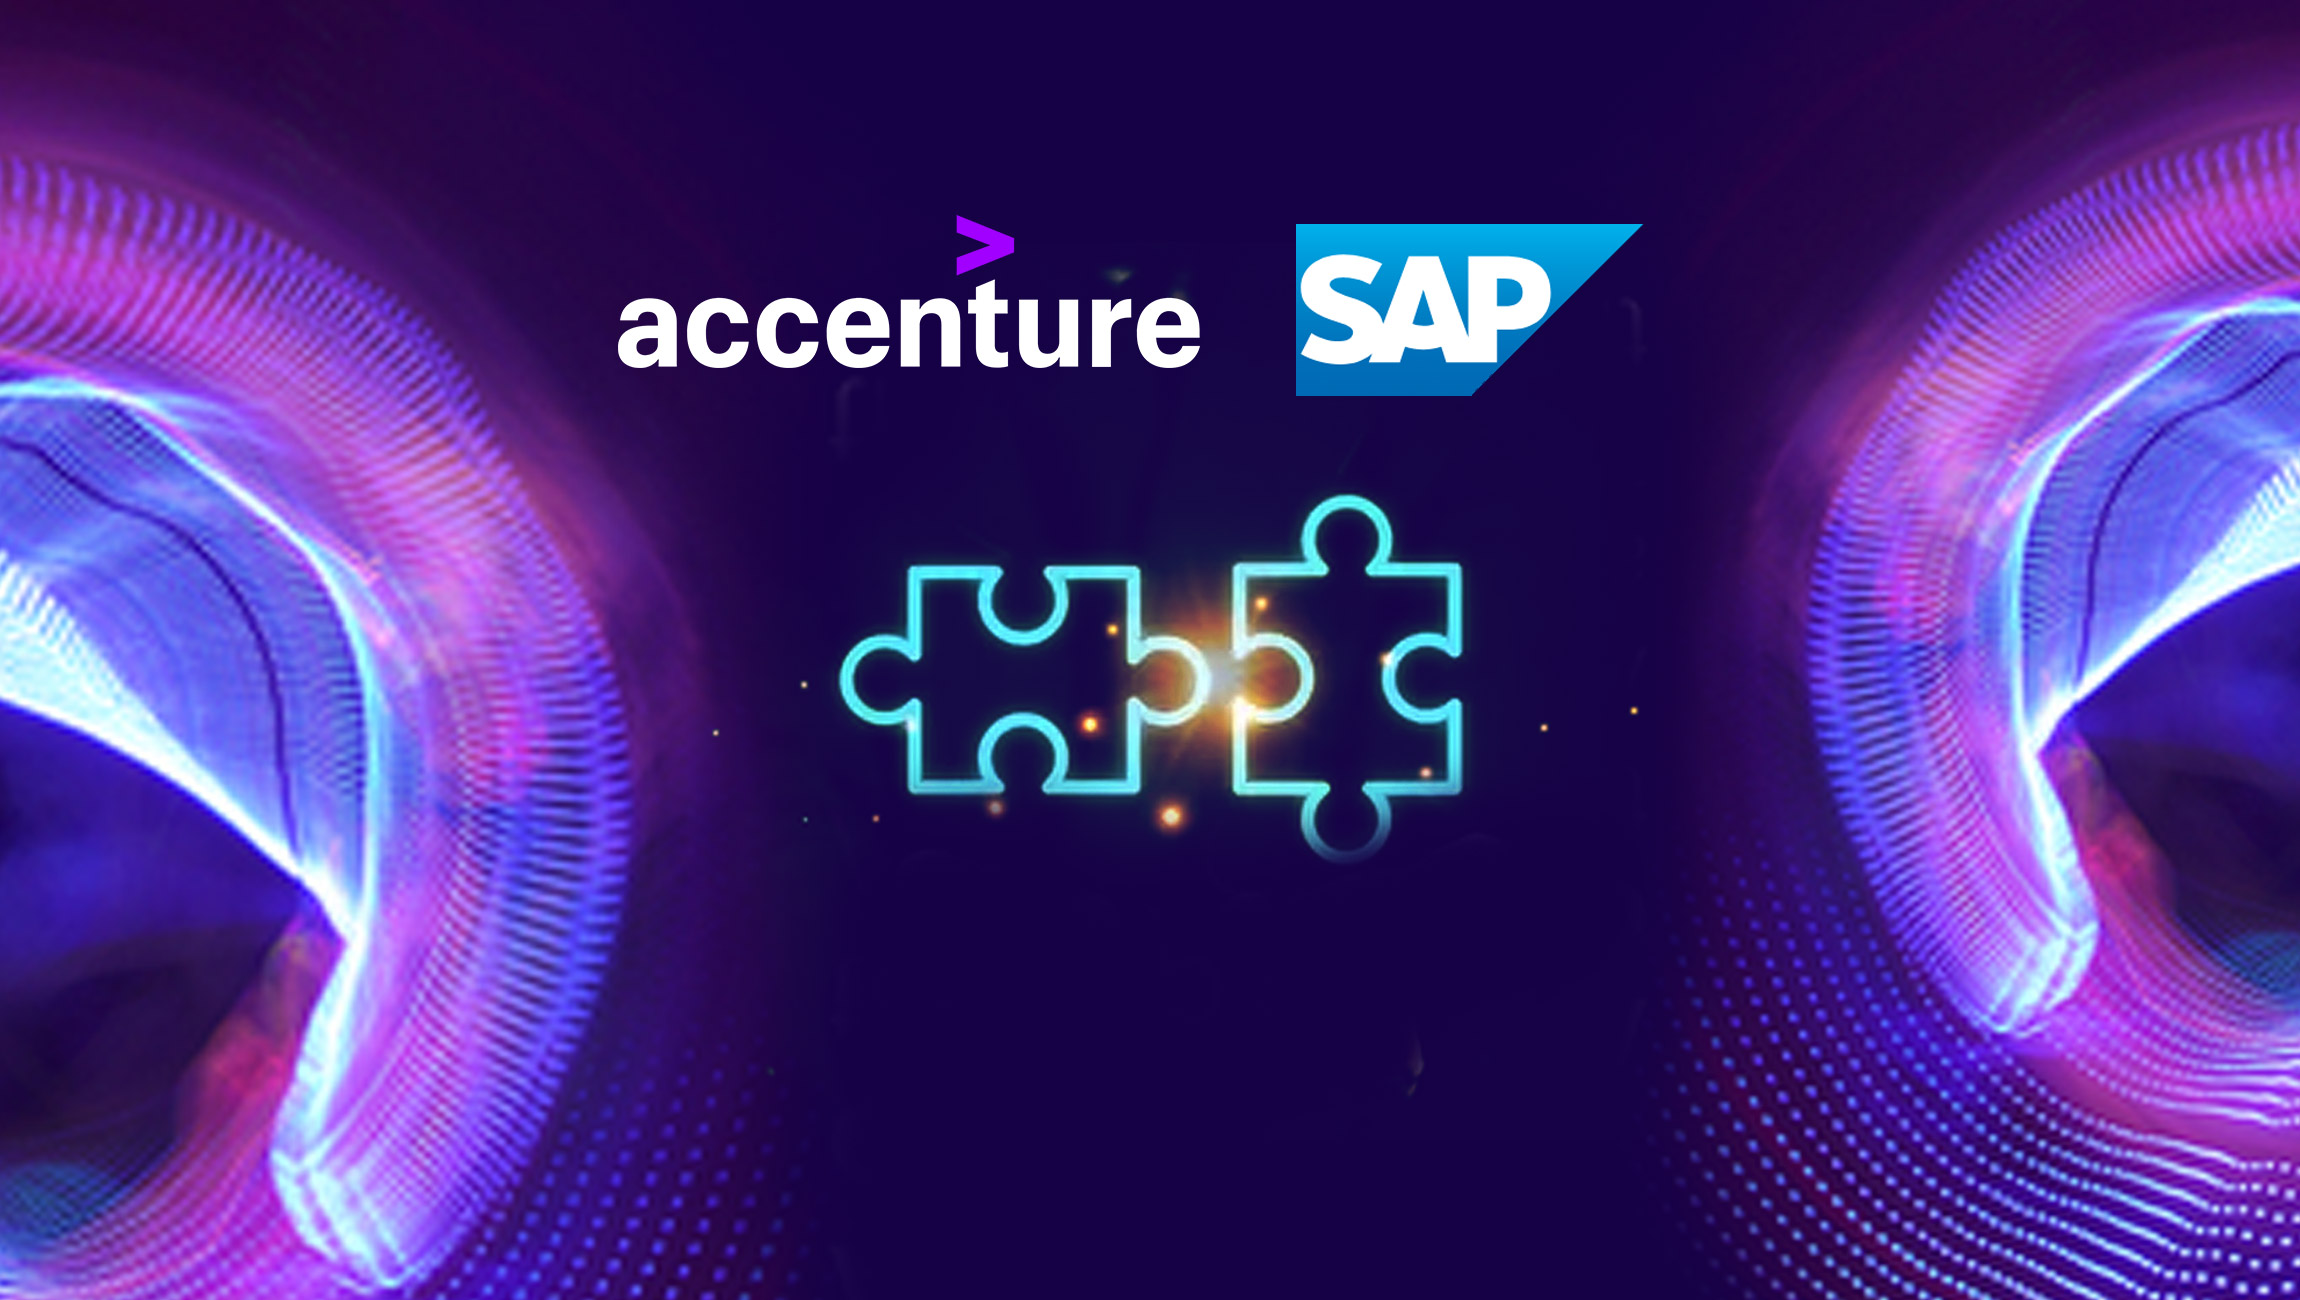 Accenture-Collaborates-with-SAP-to-Help-Organizations-Adopt-Generative-AI-and-Accelerate-ERP-Transformation-in-the-Cloud